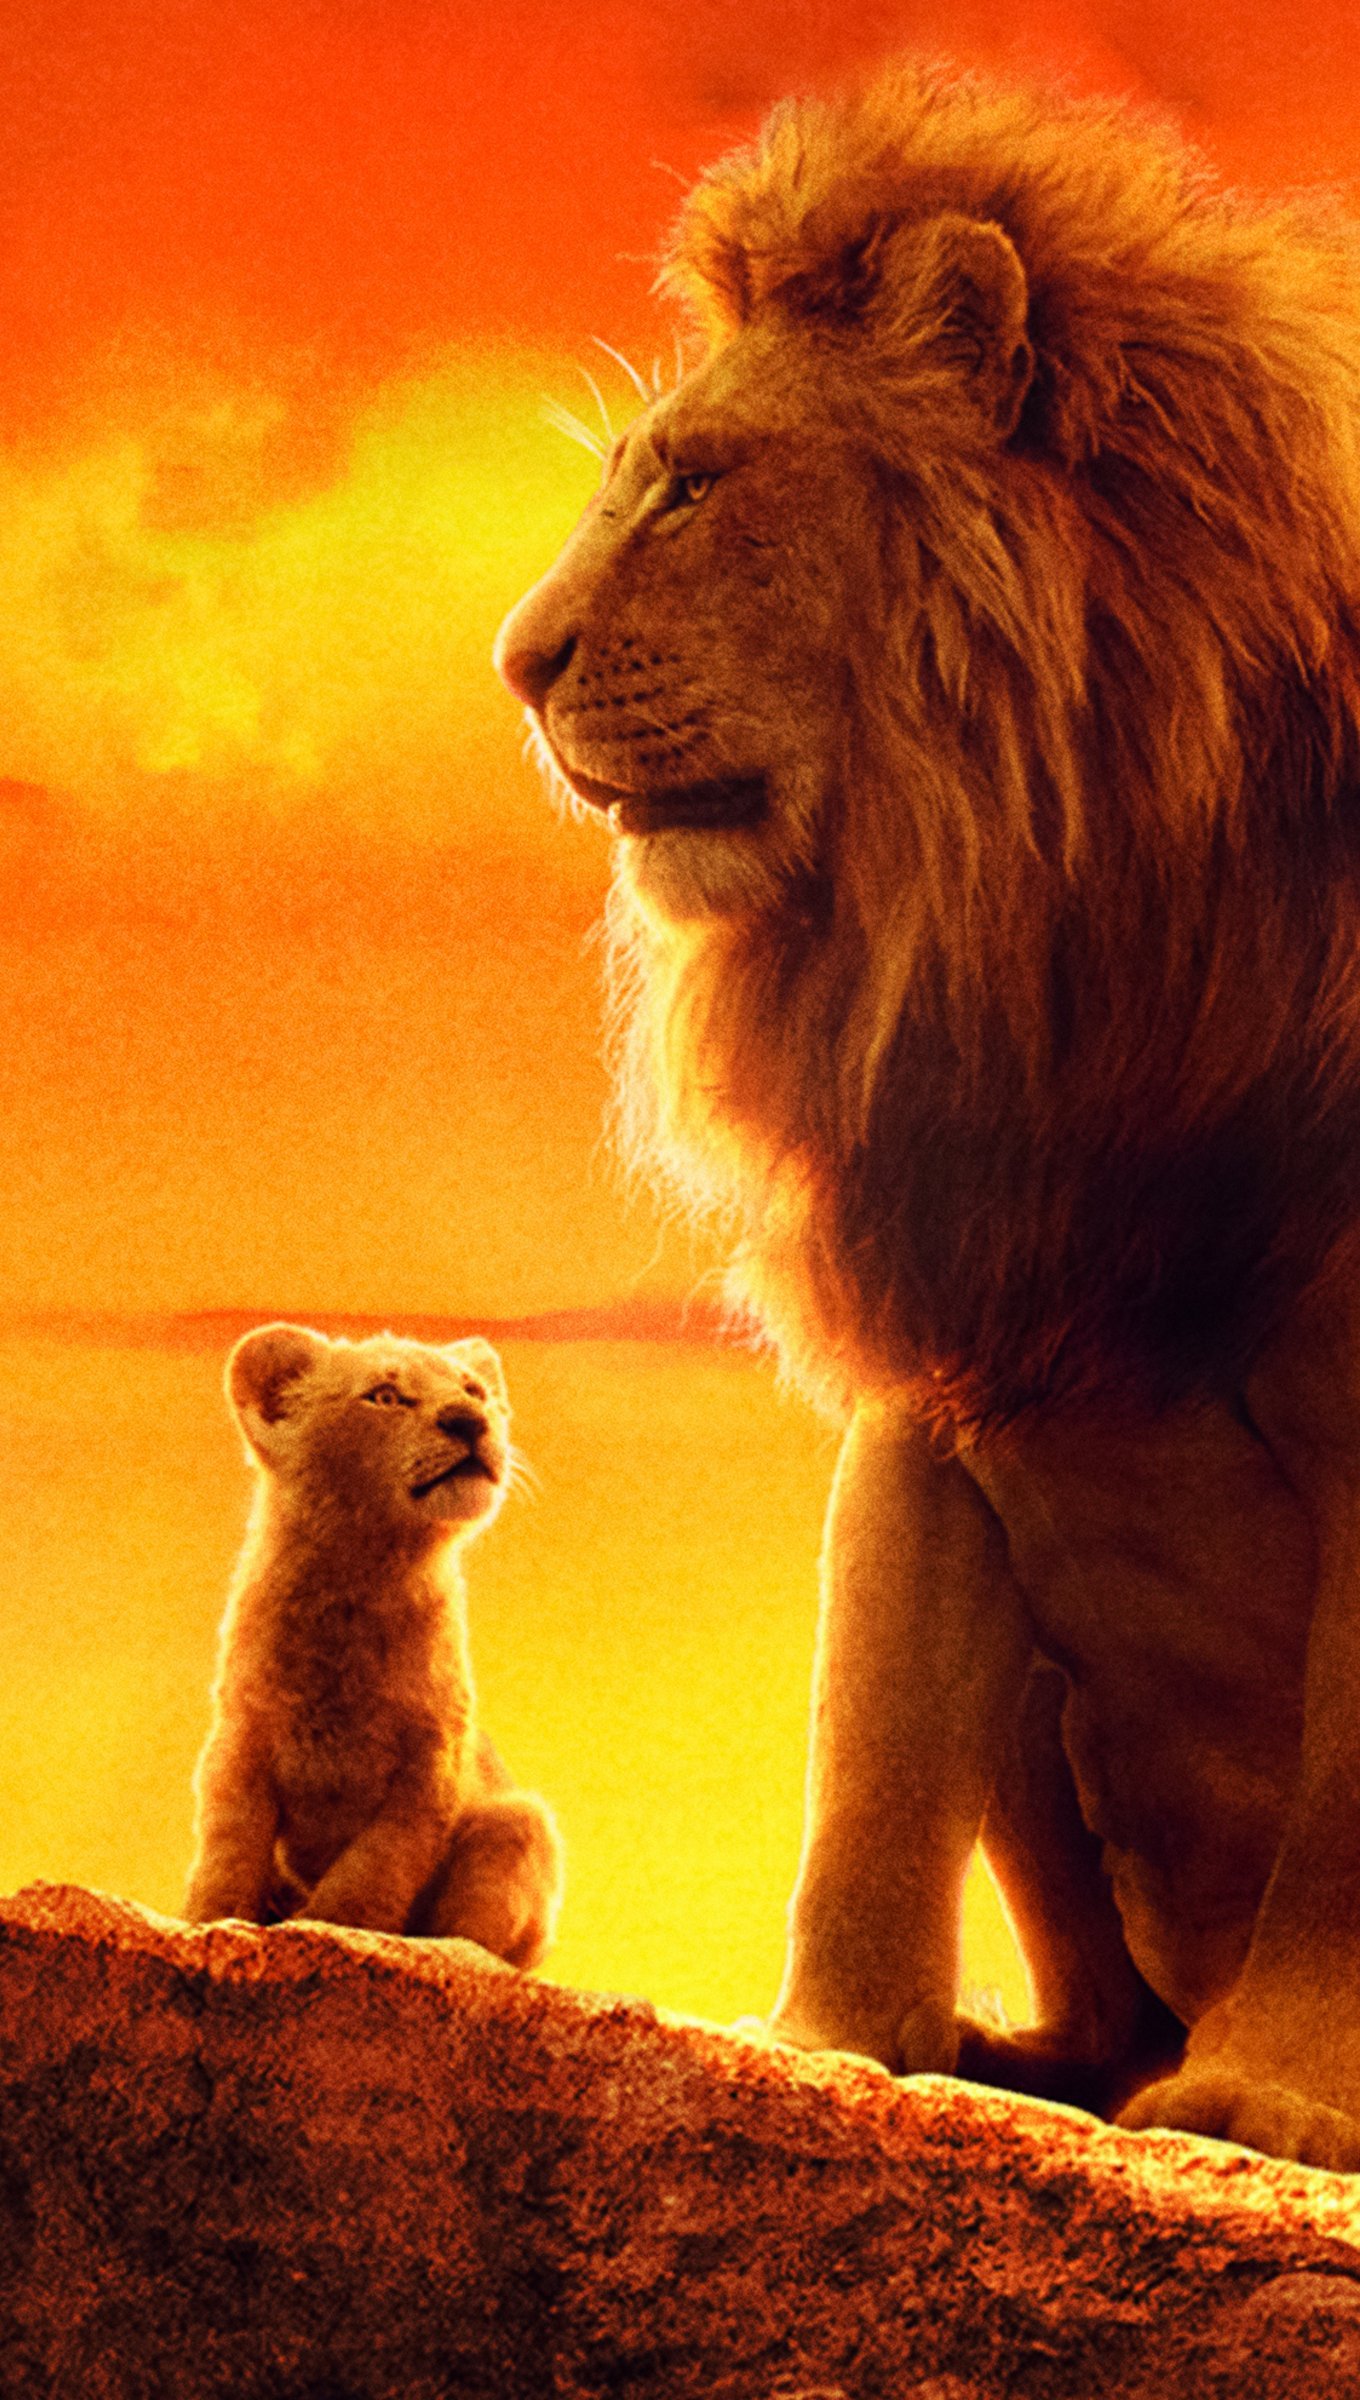 Premium AI Image  The lion king wallpapers hd wallpapers desktop wallpaper   most viewed